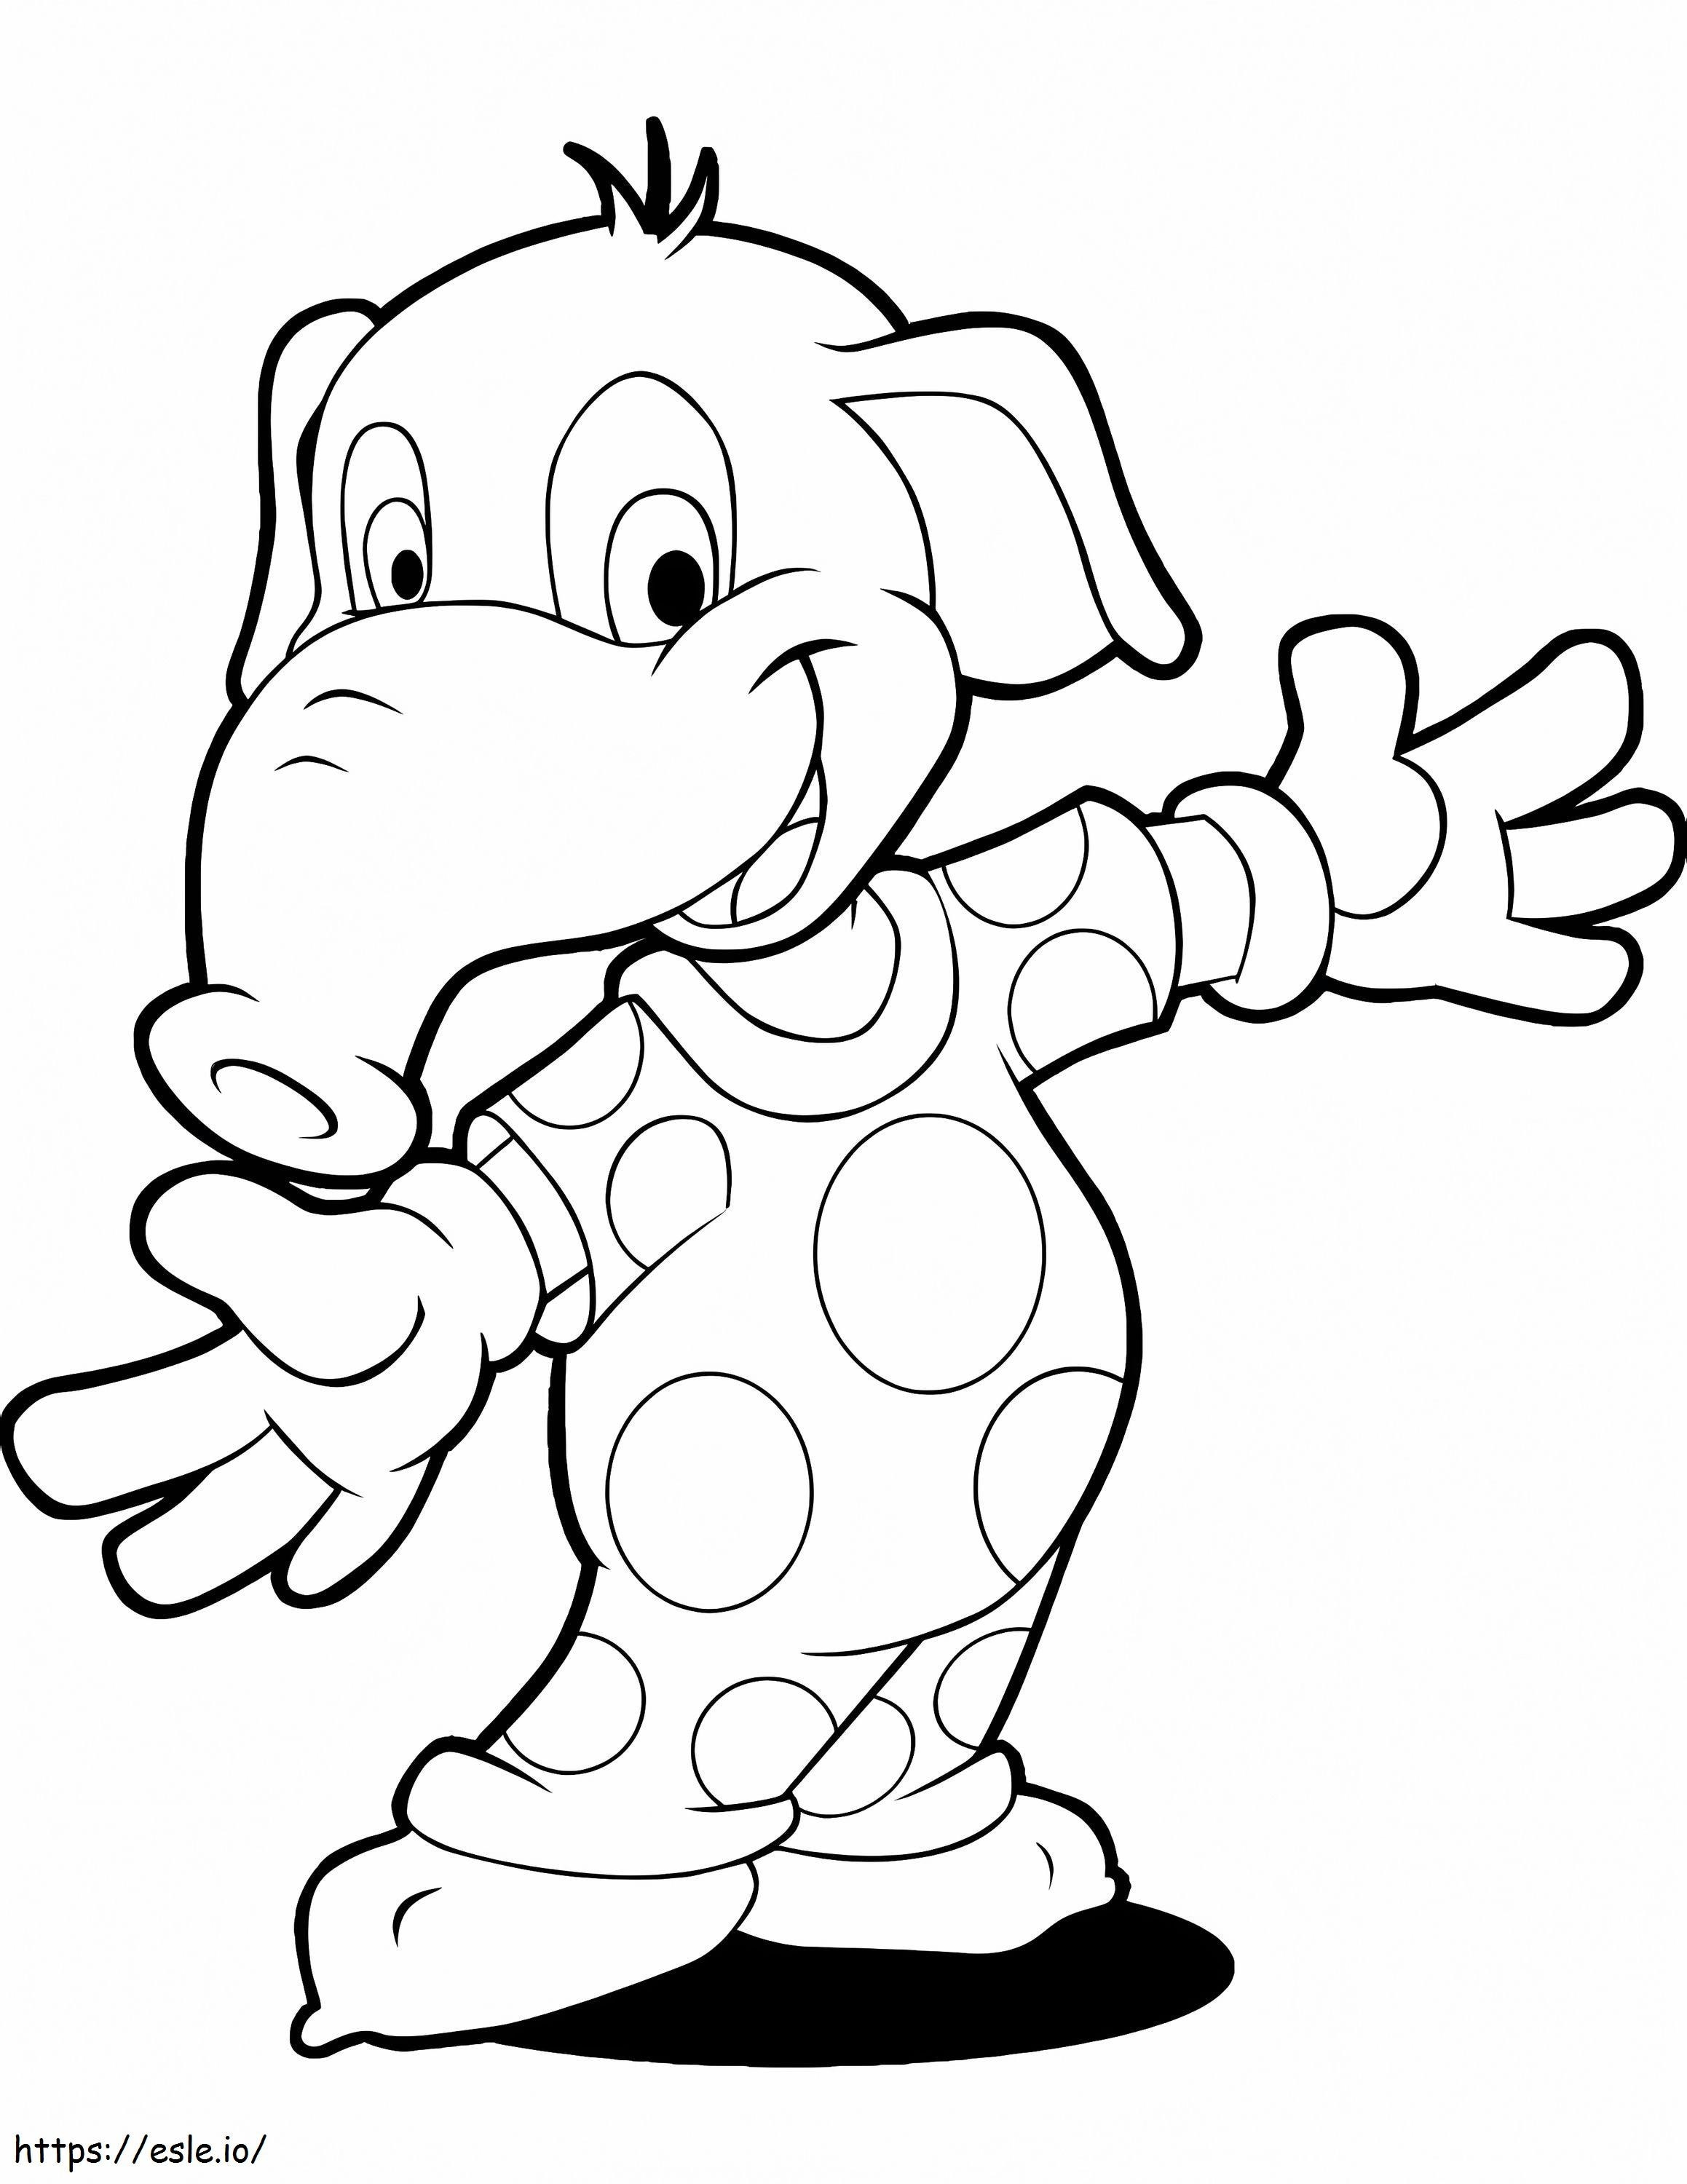 Cartoon Baby Elephant coloring page